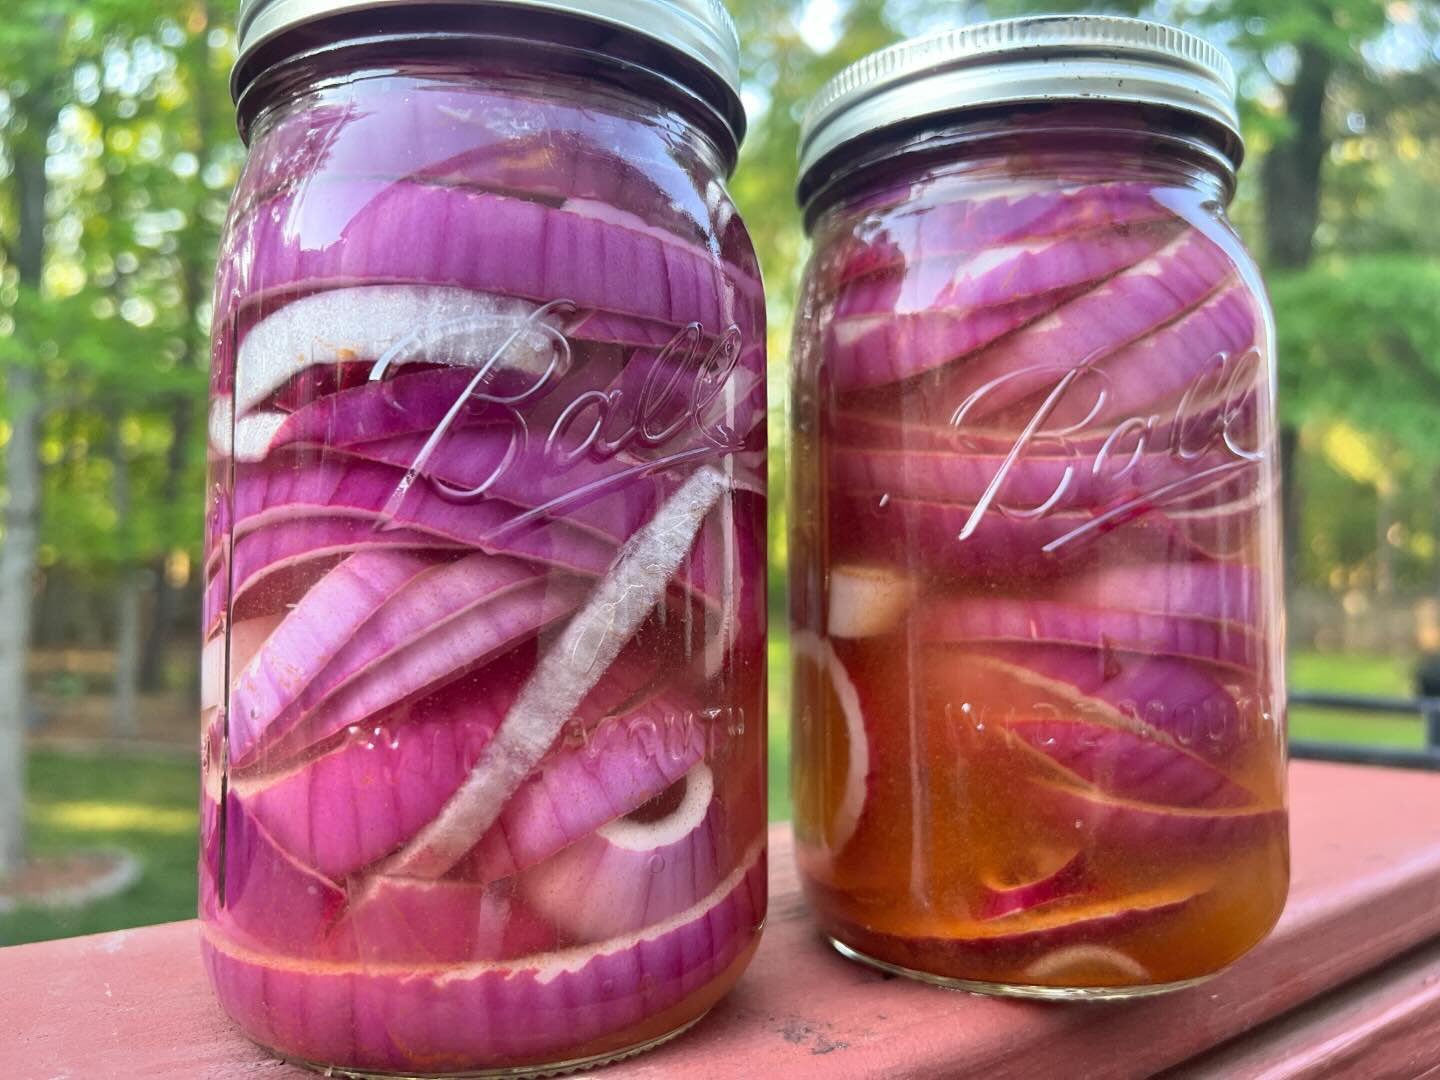 Pickled red onions will be served up with tomorrow&rsquo;s chopped brisket sandwich. This minor garnish plays a major role when enjoy rich, fatty beef bbq!

See y&rsquo;all at the Laurel Main Street Festival tomorrow! (Also available: pulled pork, gr